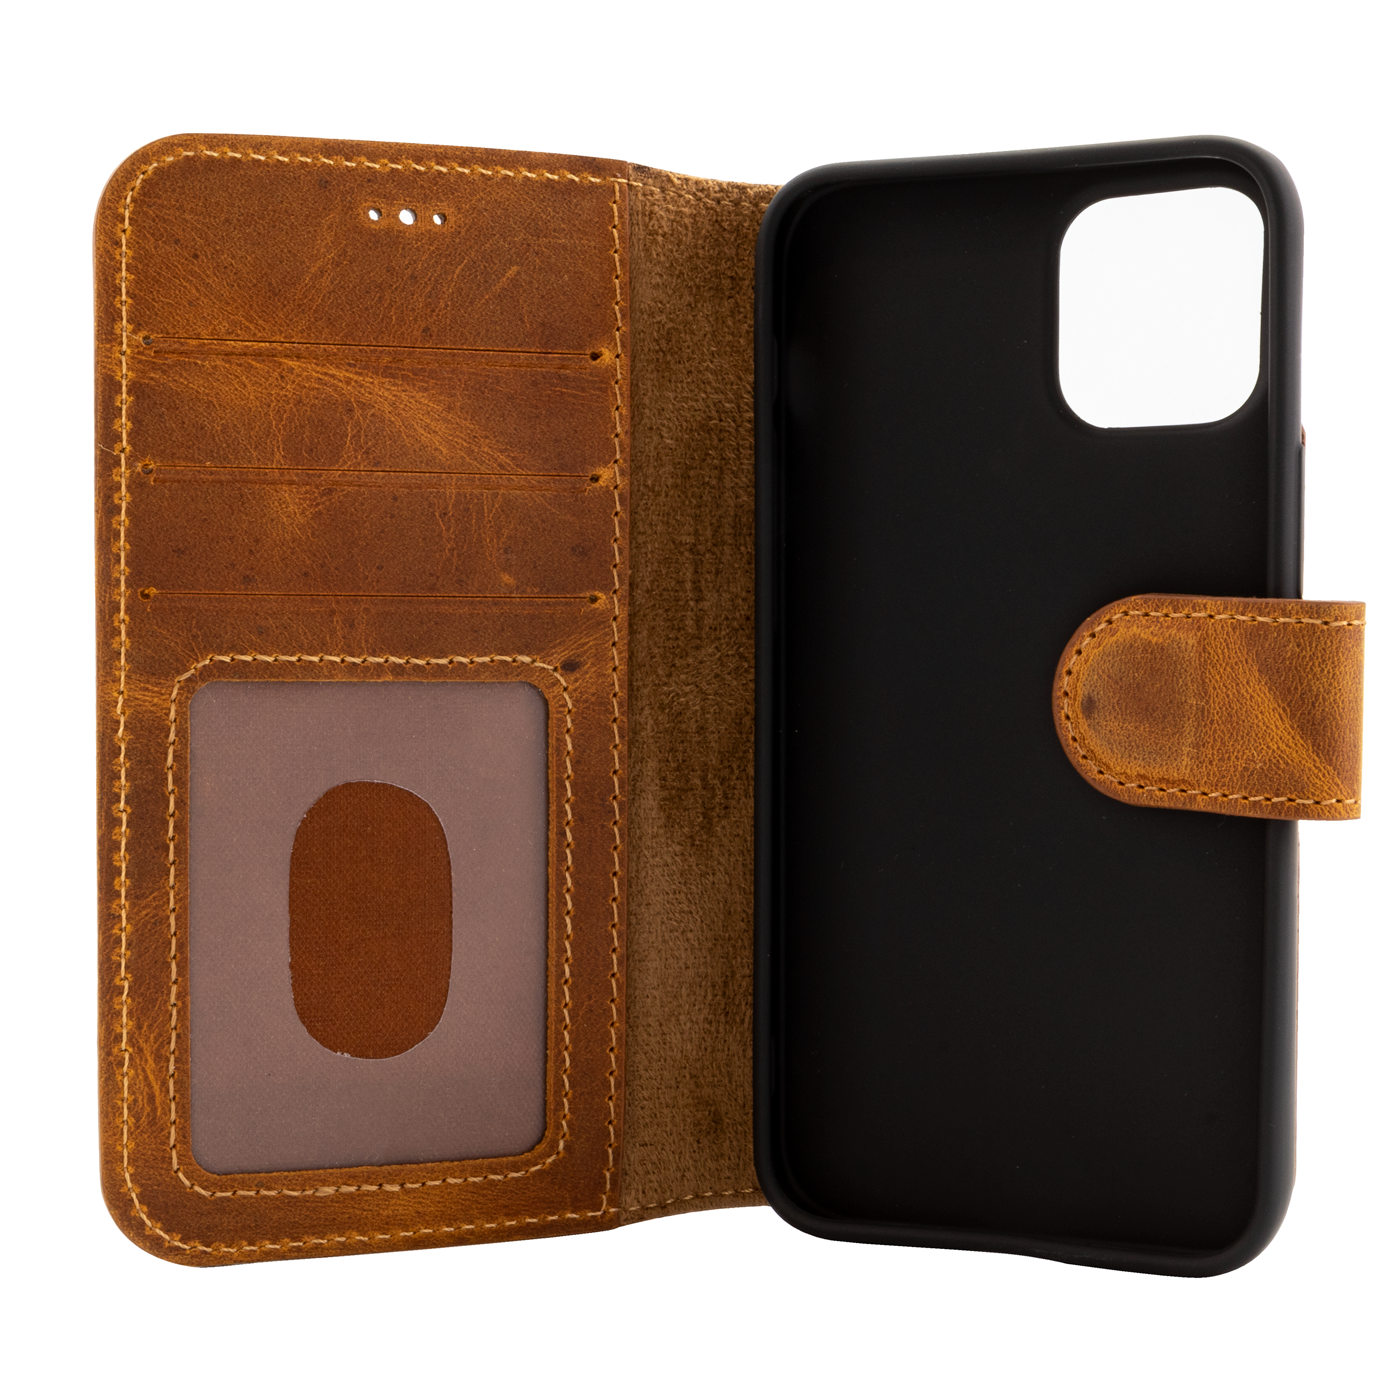 Galen Leather Phone Cases for Iphone 12